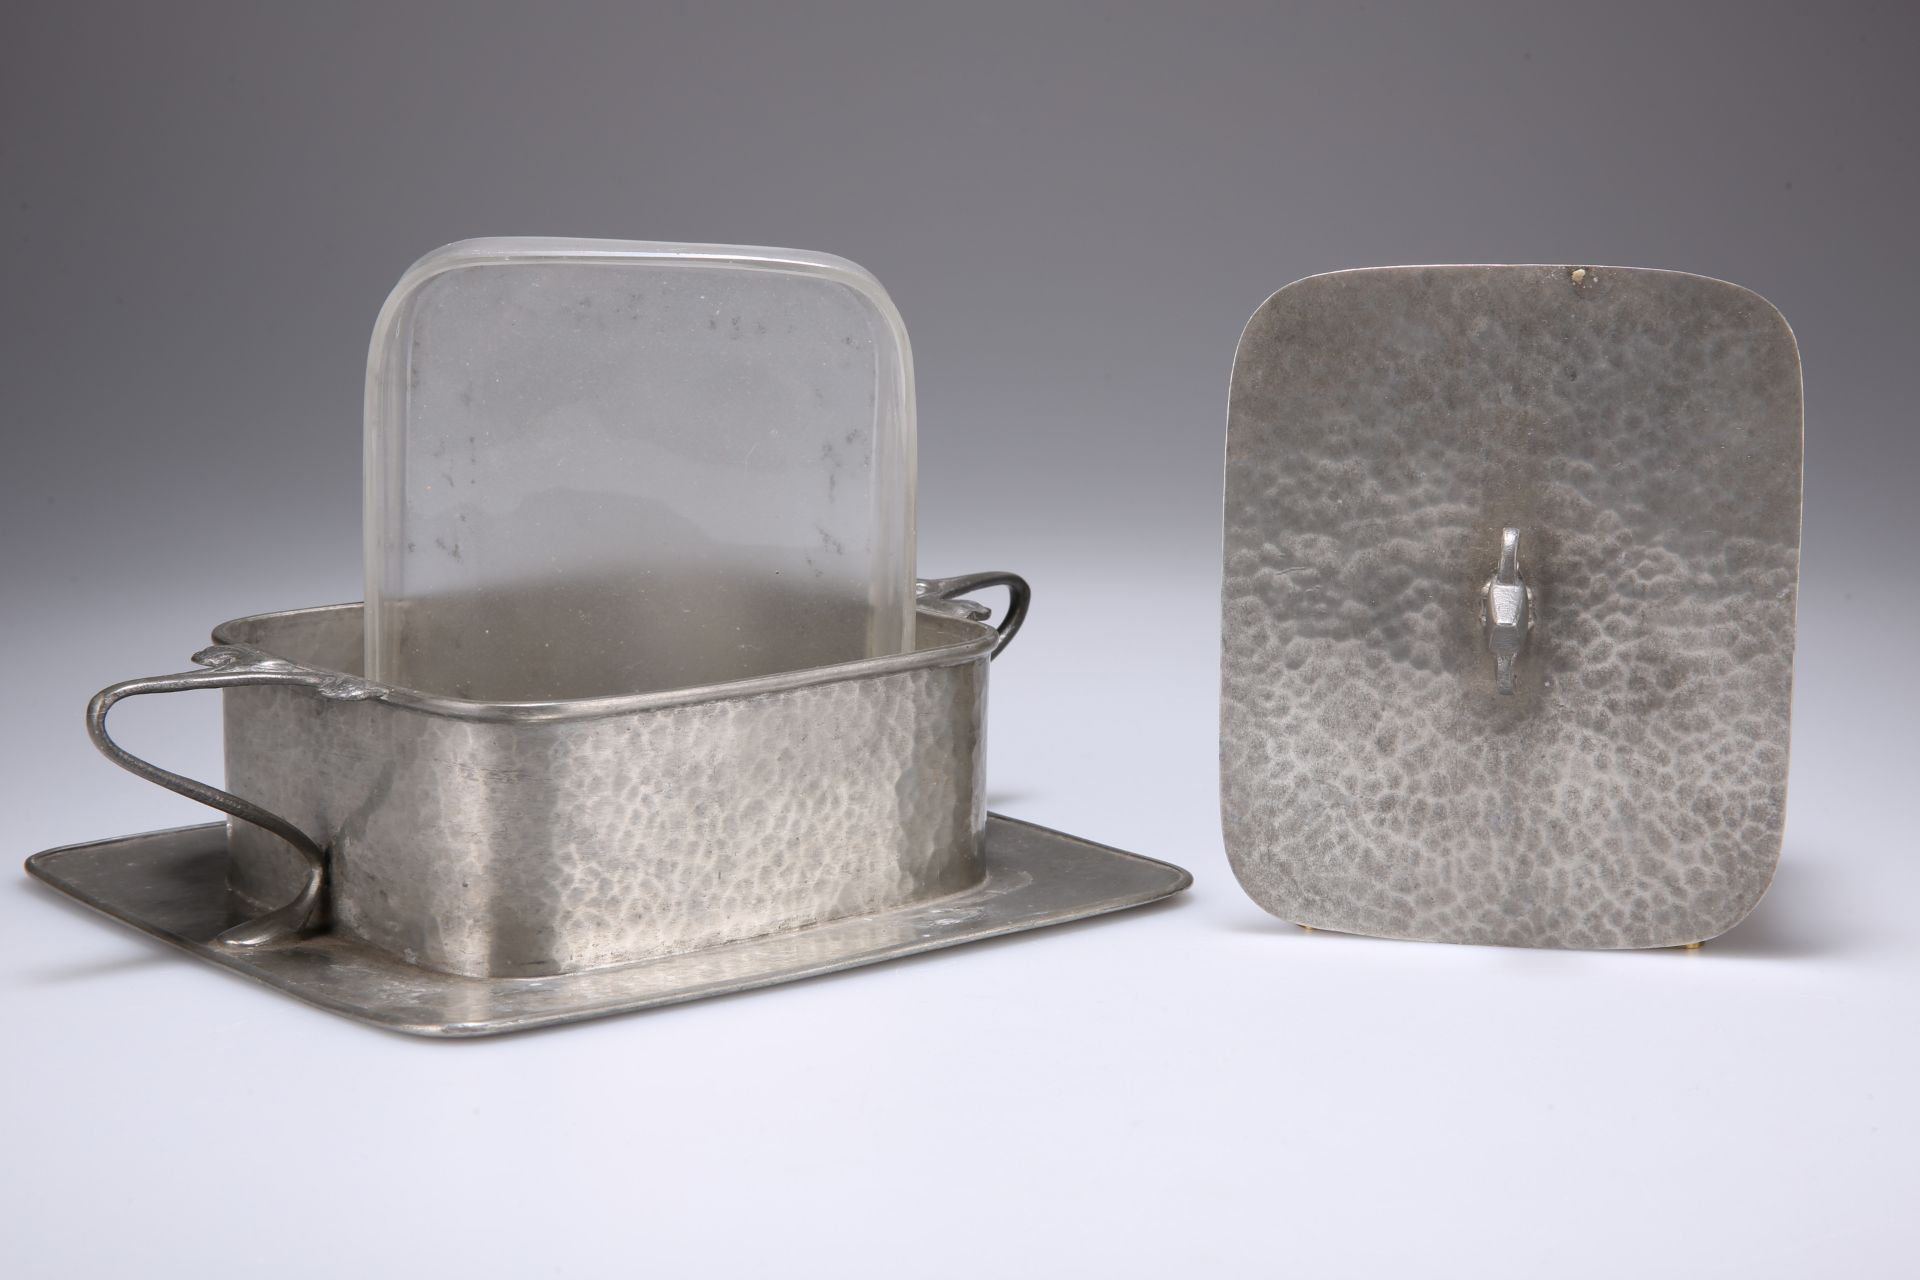 AN ART NOUVEAU PEWTER BUTTER DISH BY CONNELL - Image 3 of 3